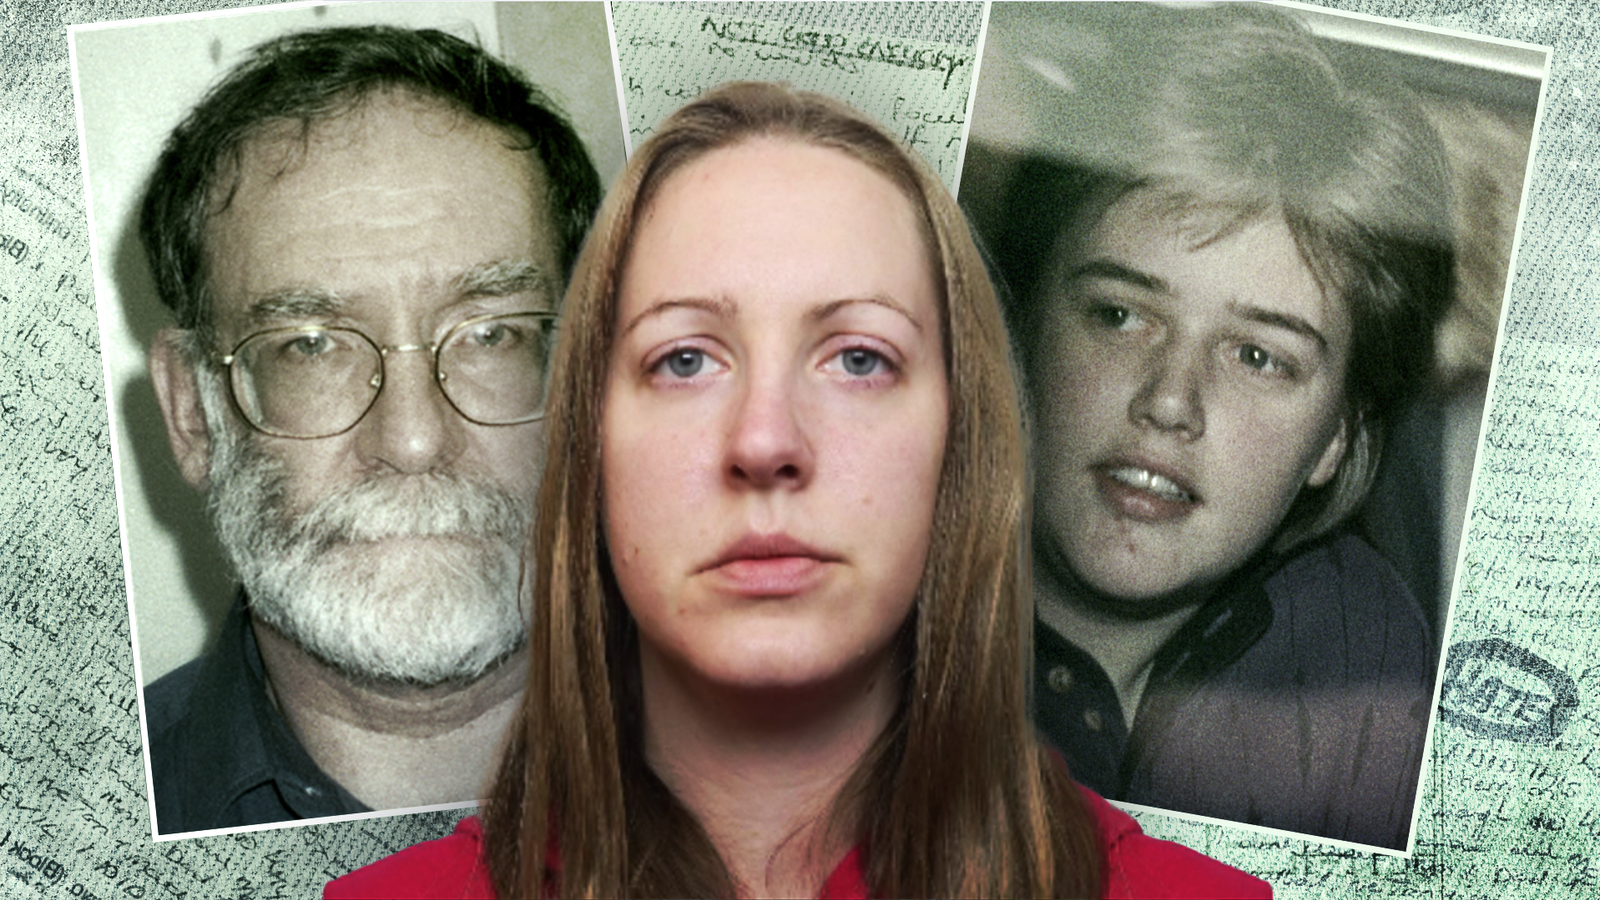 Lucy Letby: Inside the mind of a serial killer - the psychology behind healthcare murderers